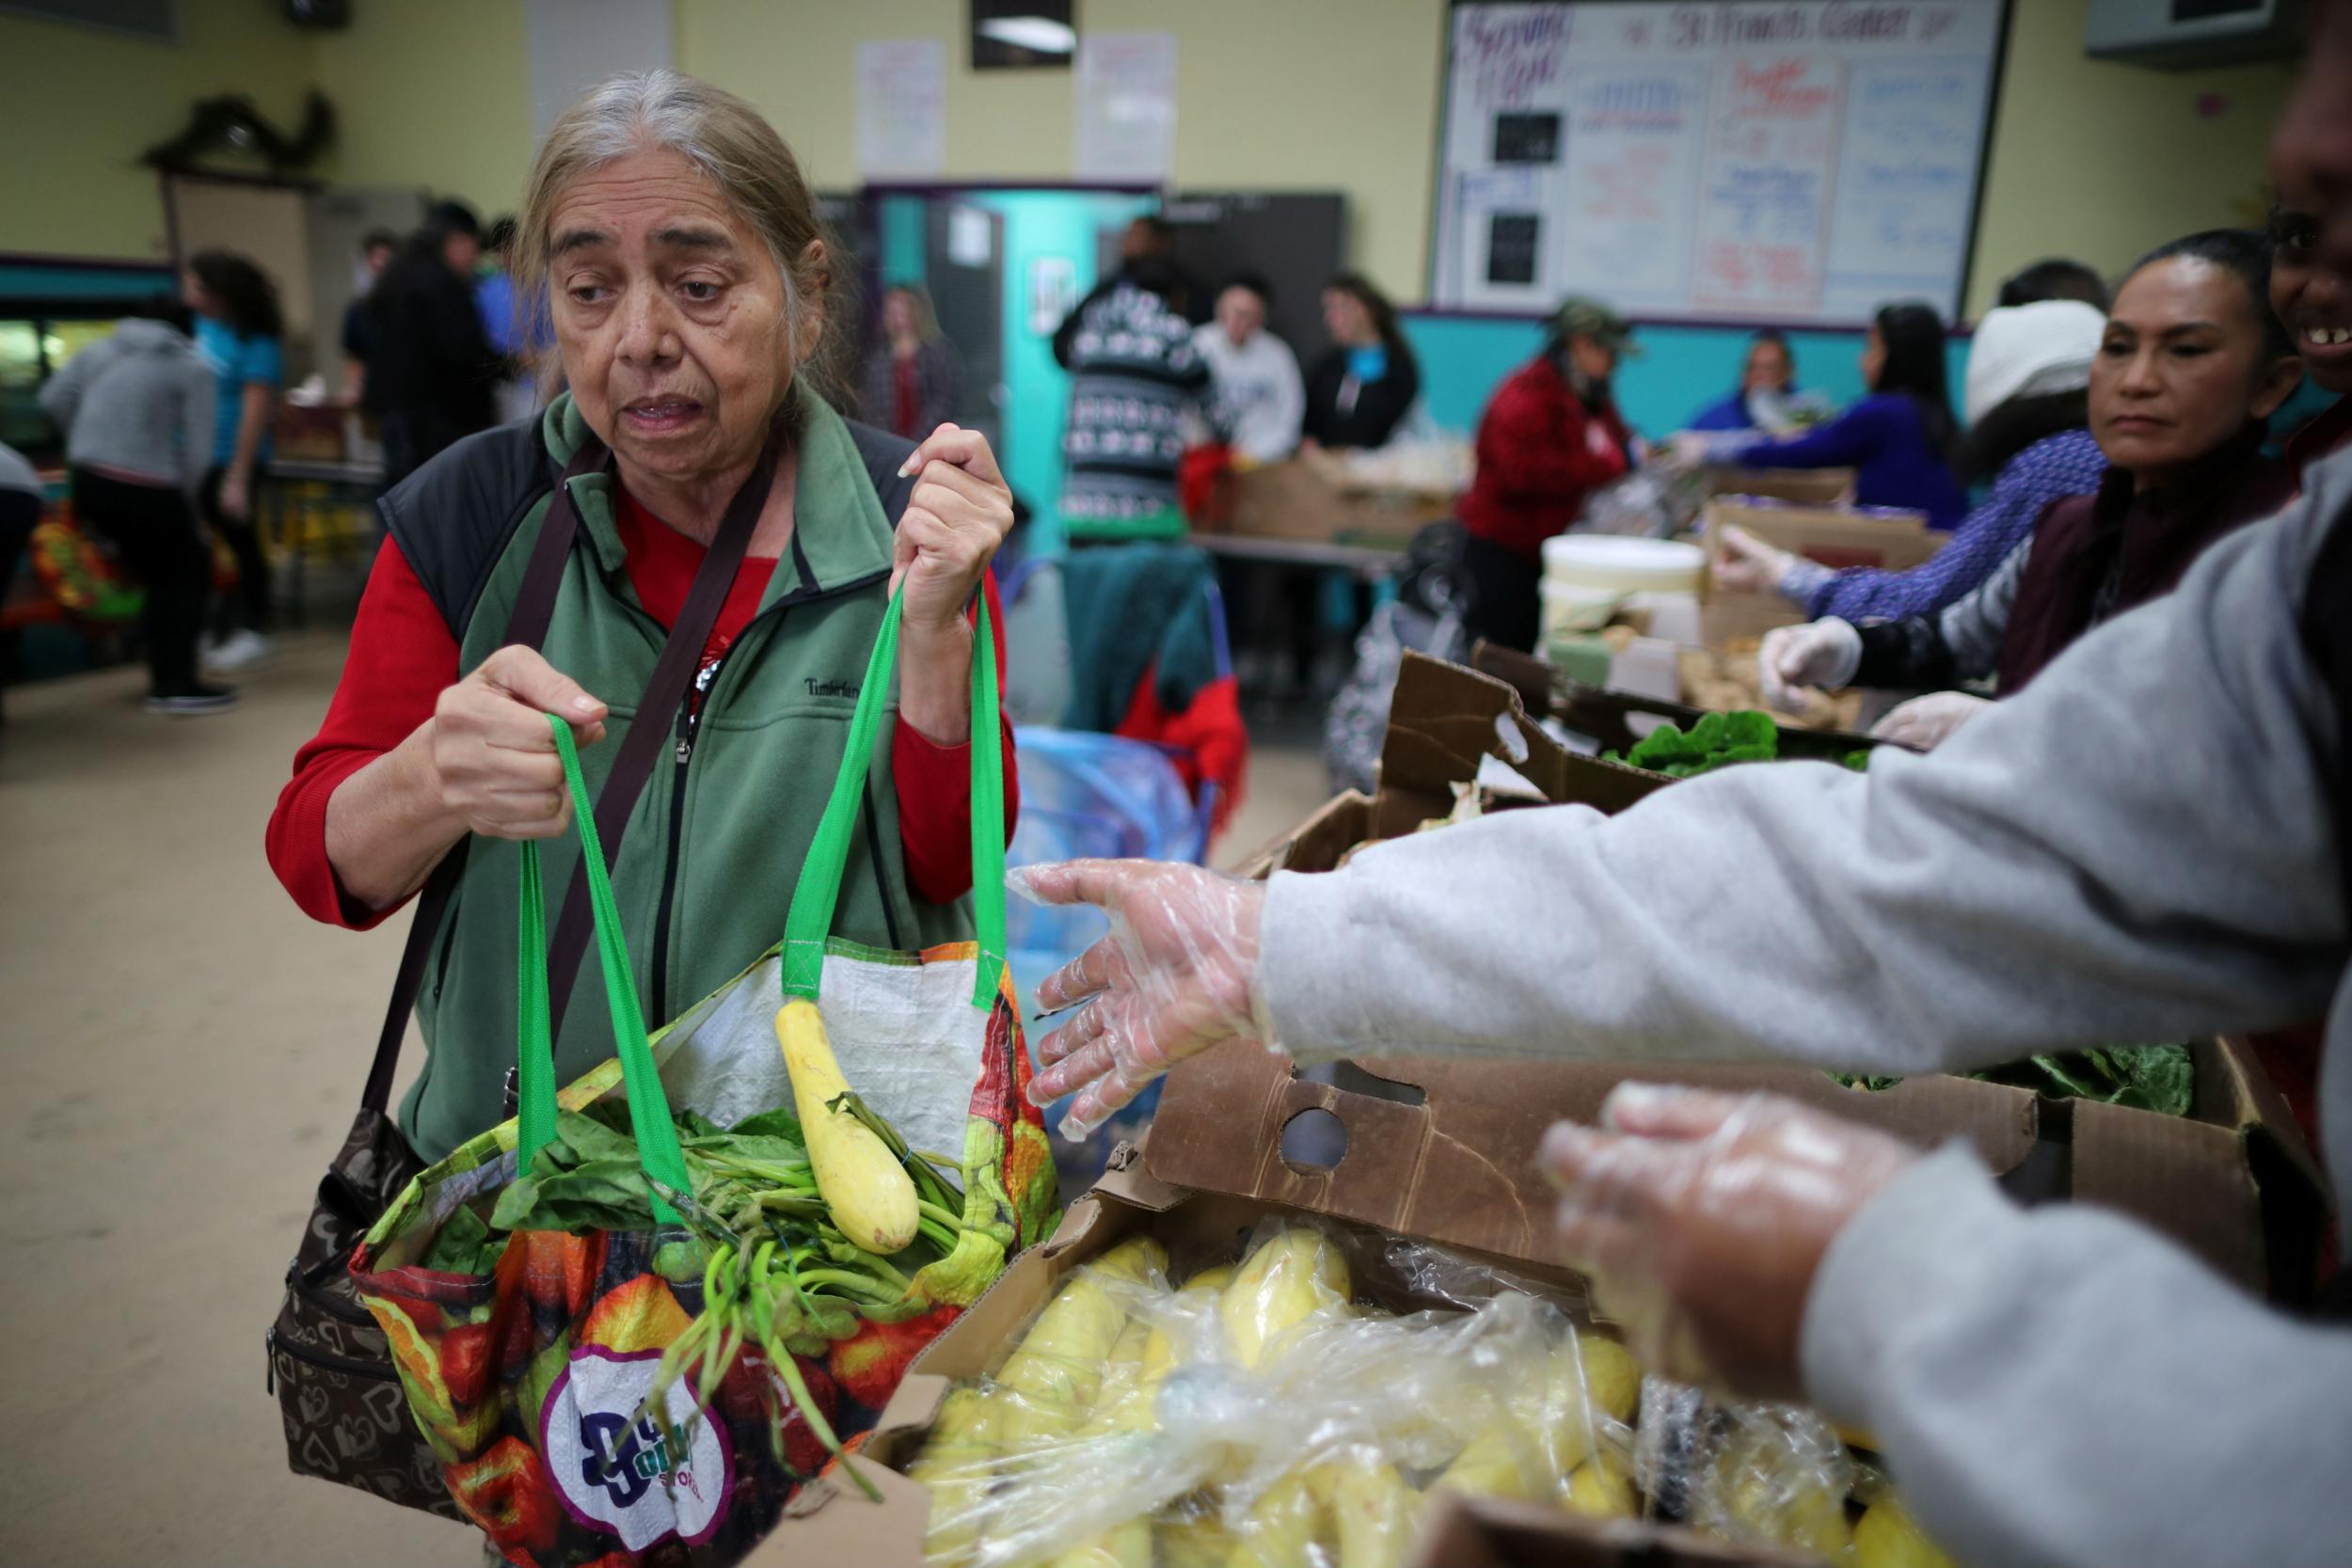 A woman collects provisions at a food bank for the poor in Los Angeles